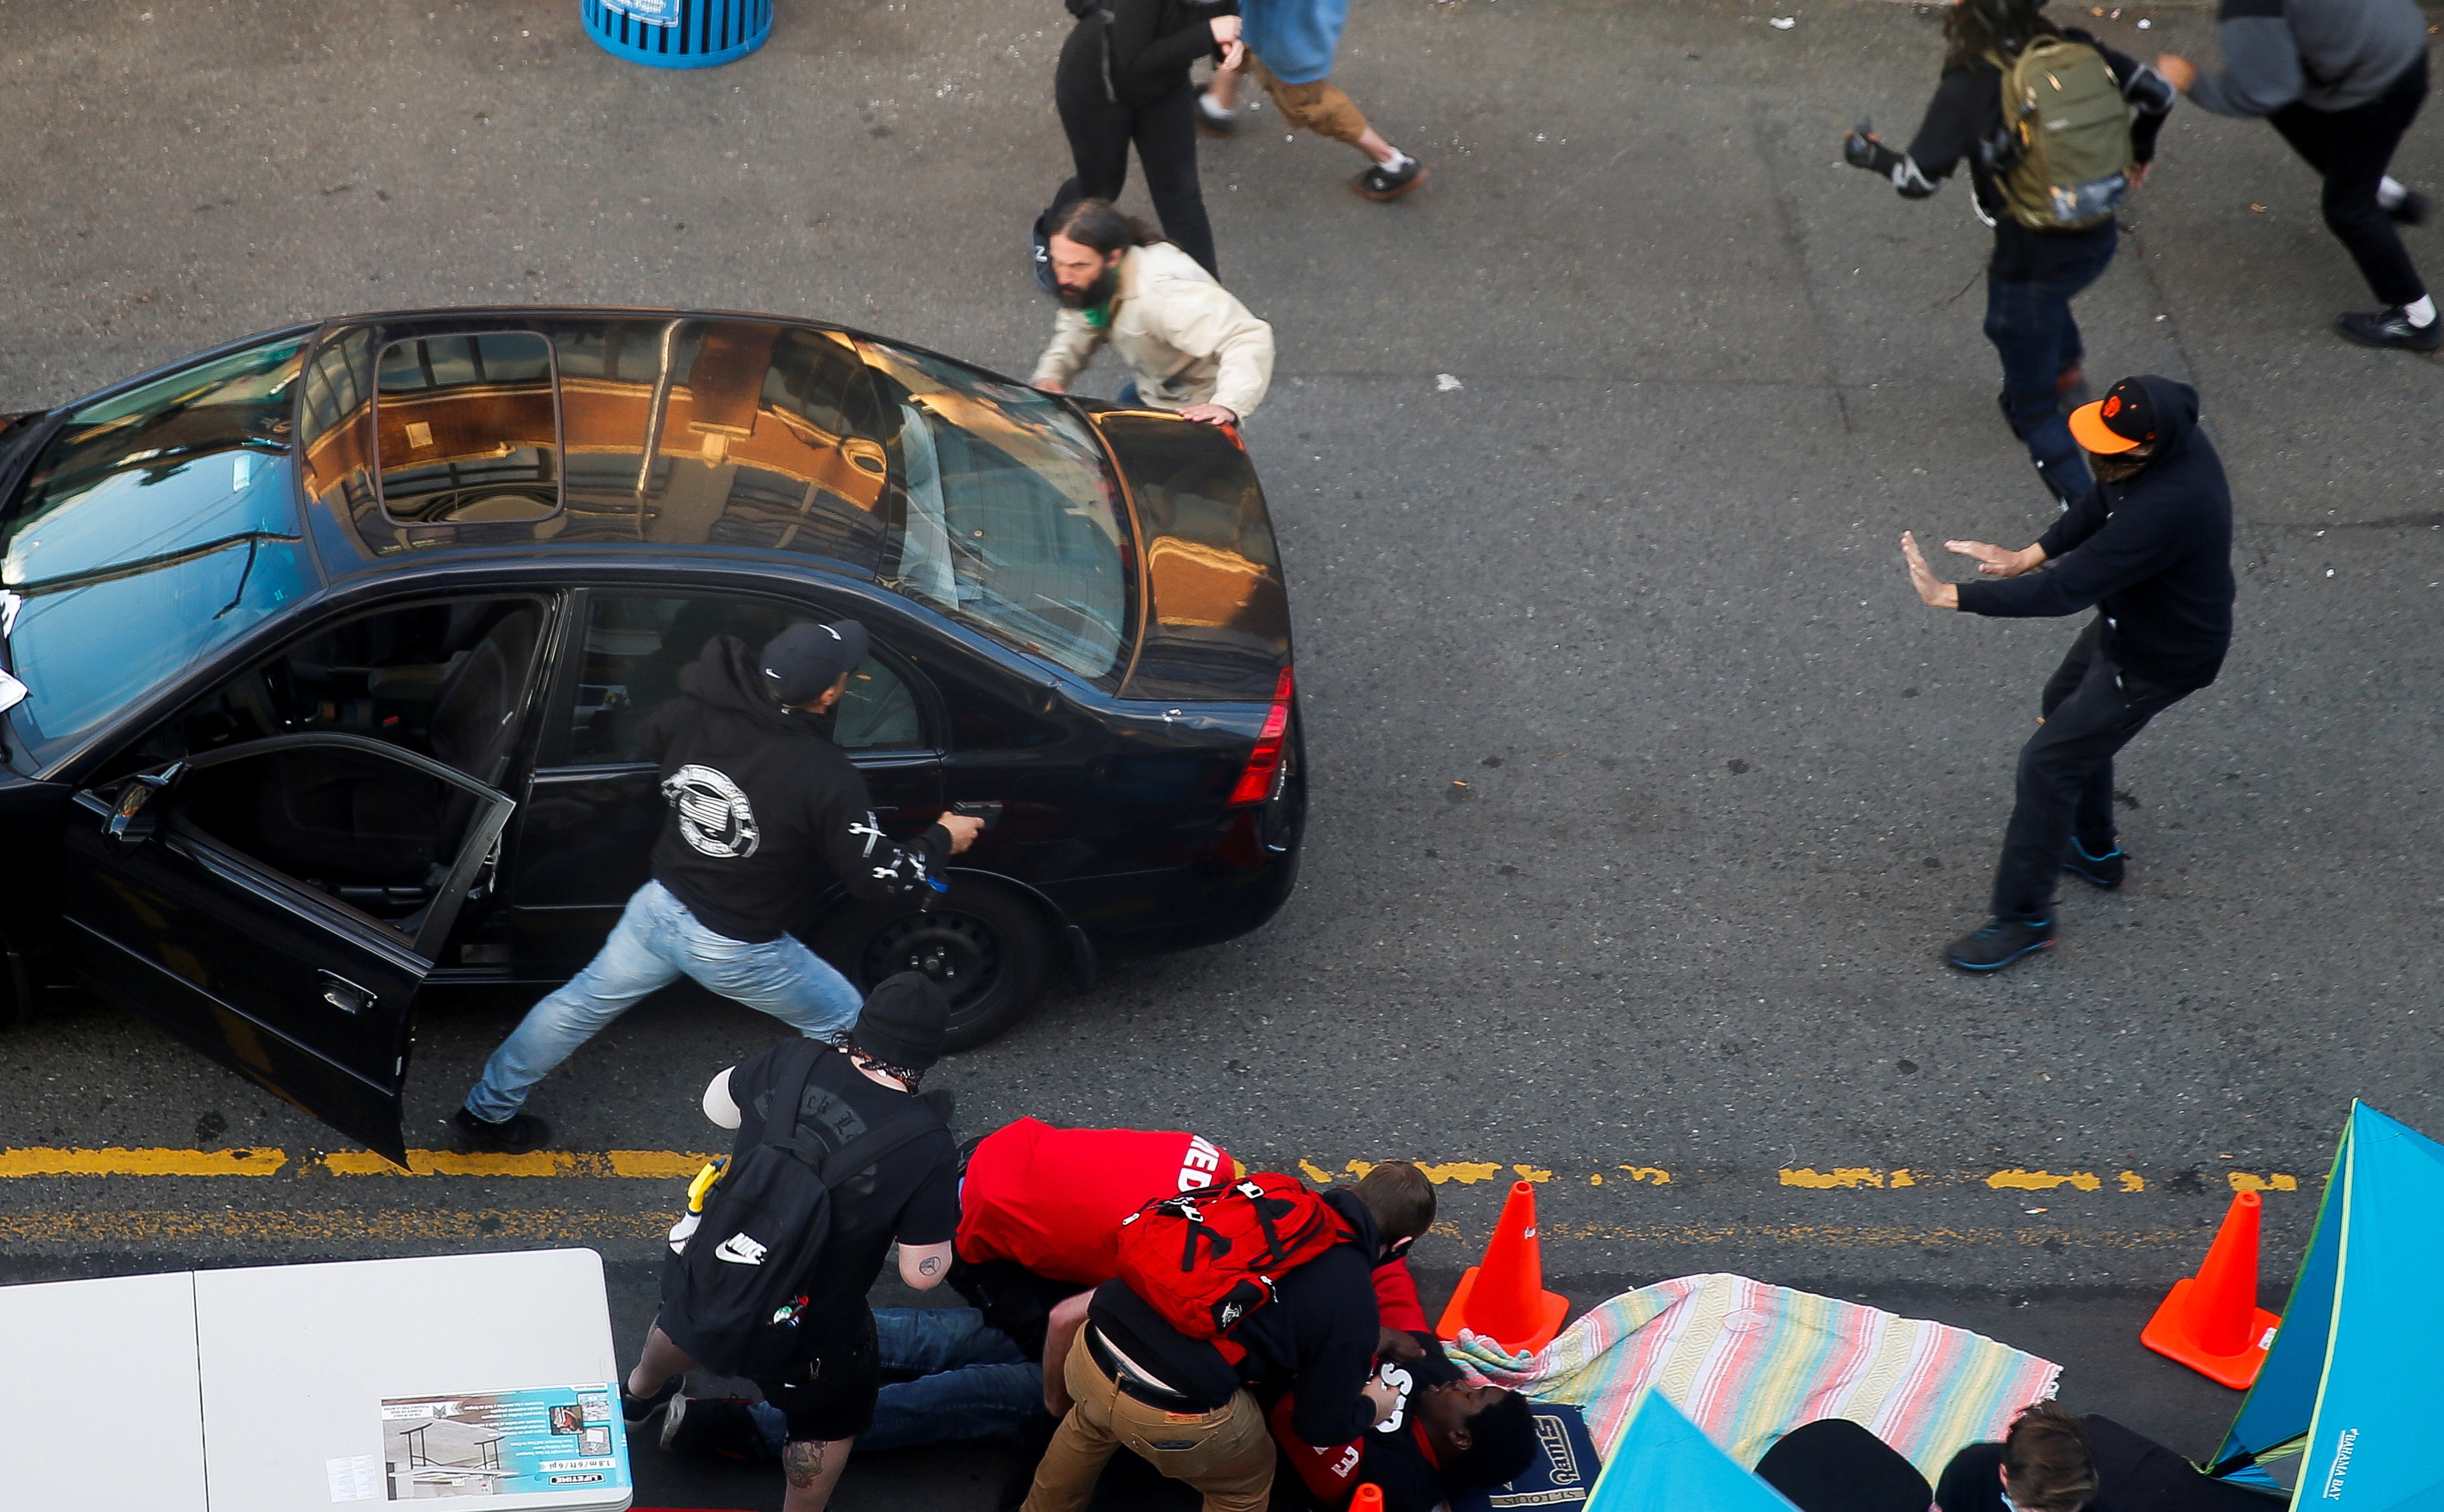 A man carrying a gun exits a vehicle as Daniel Gregory is tended to by medics after being shot in the arm by a driver who tried to drive through a protest against racial inequality in Seattle, Washington, in June